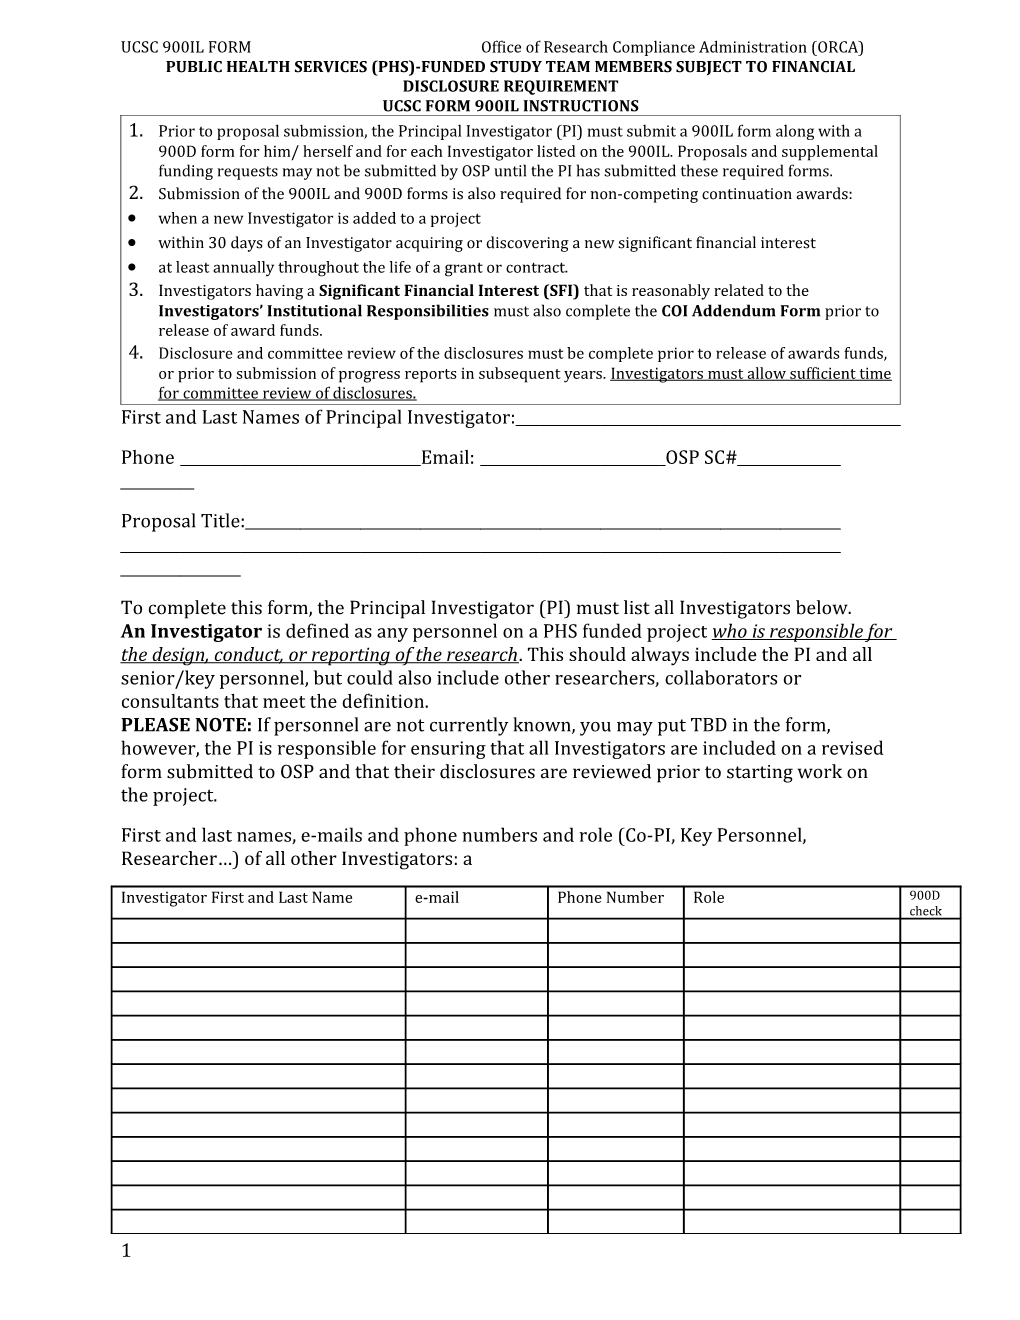 UCSC 900IL FORM Office of Research Compliance Administration (ORCA)